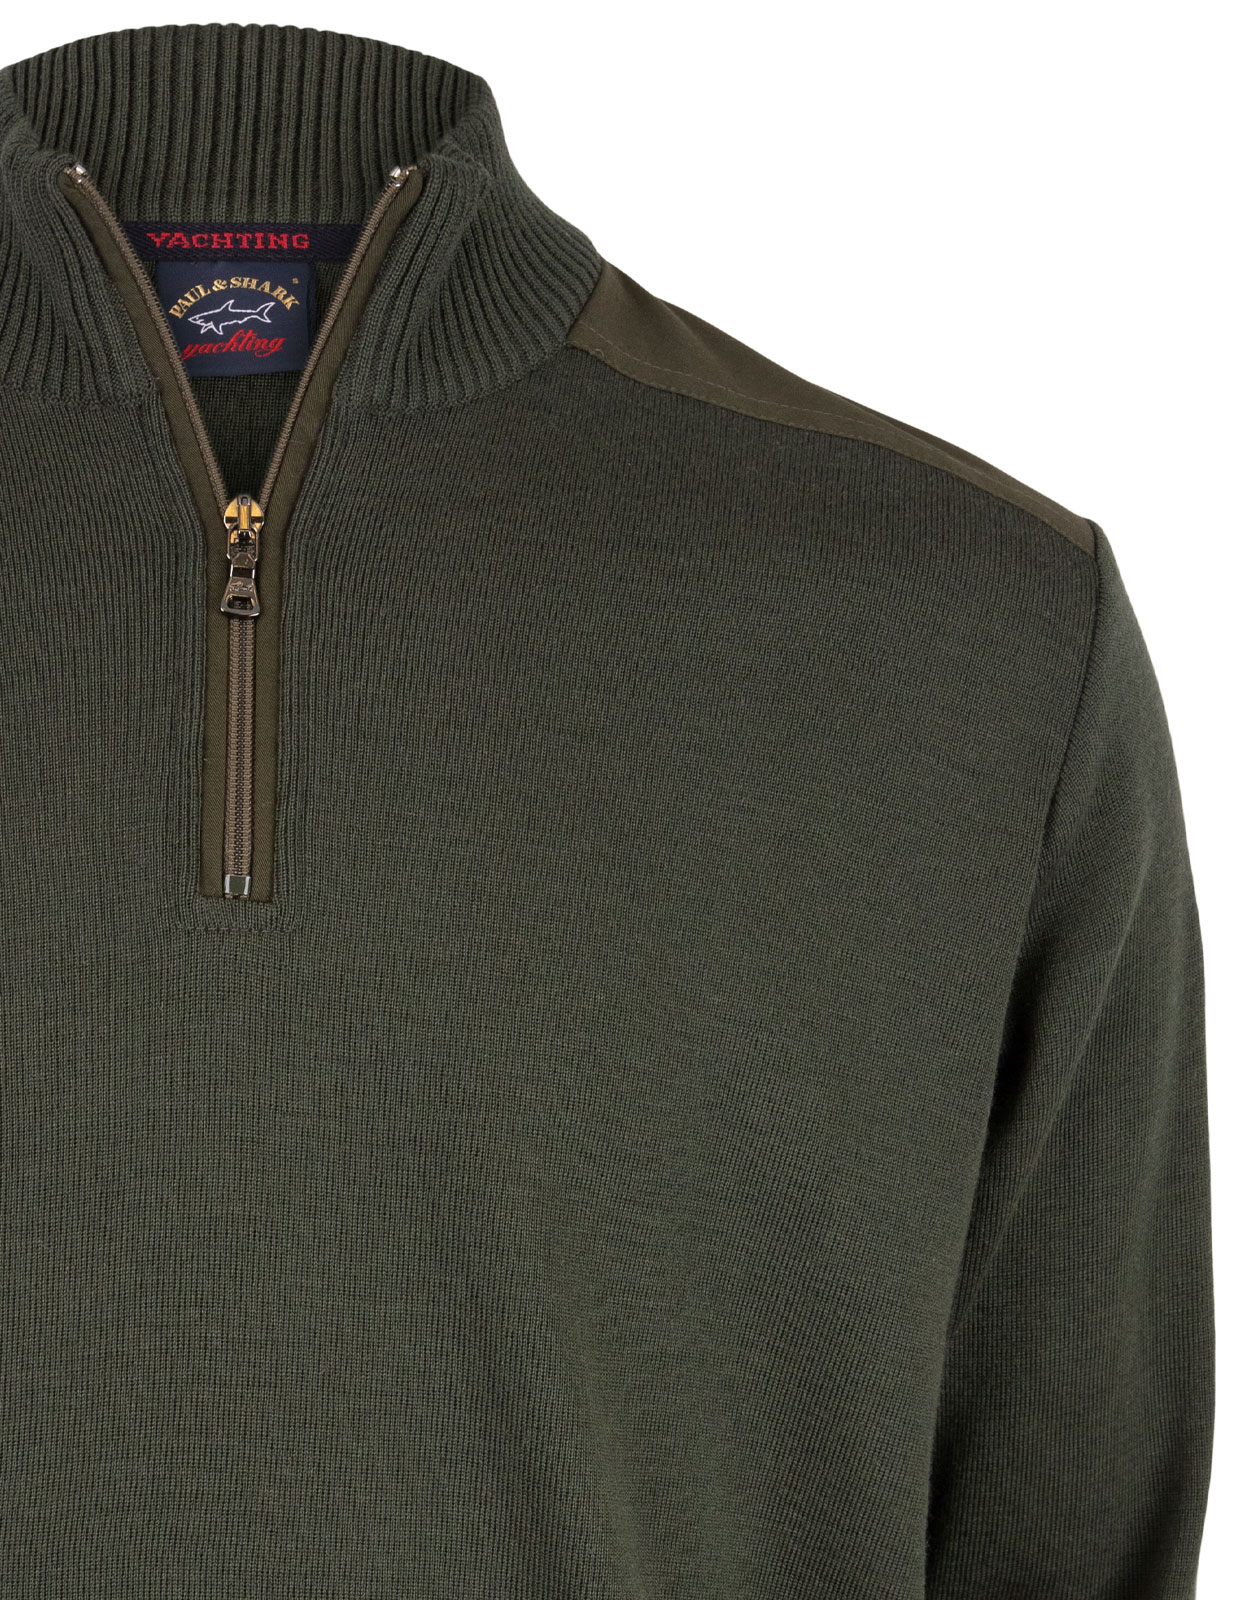 Yachting Wool Turtleneck Sweater Olive Stl M